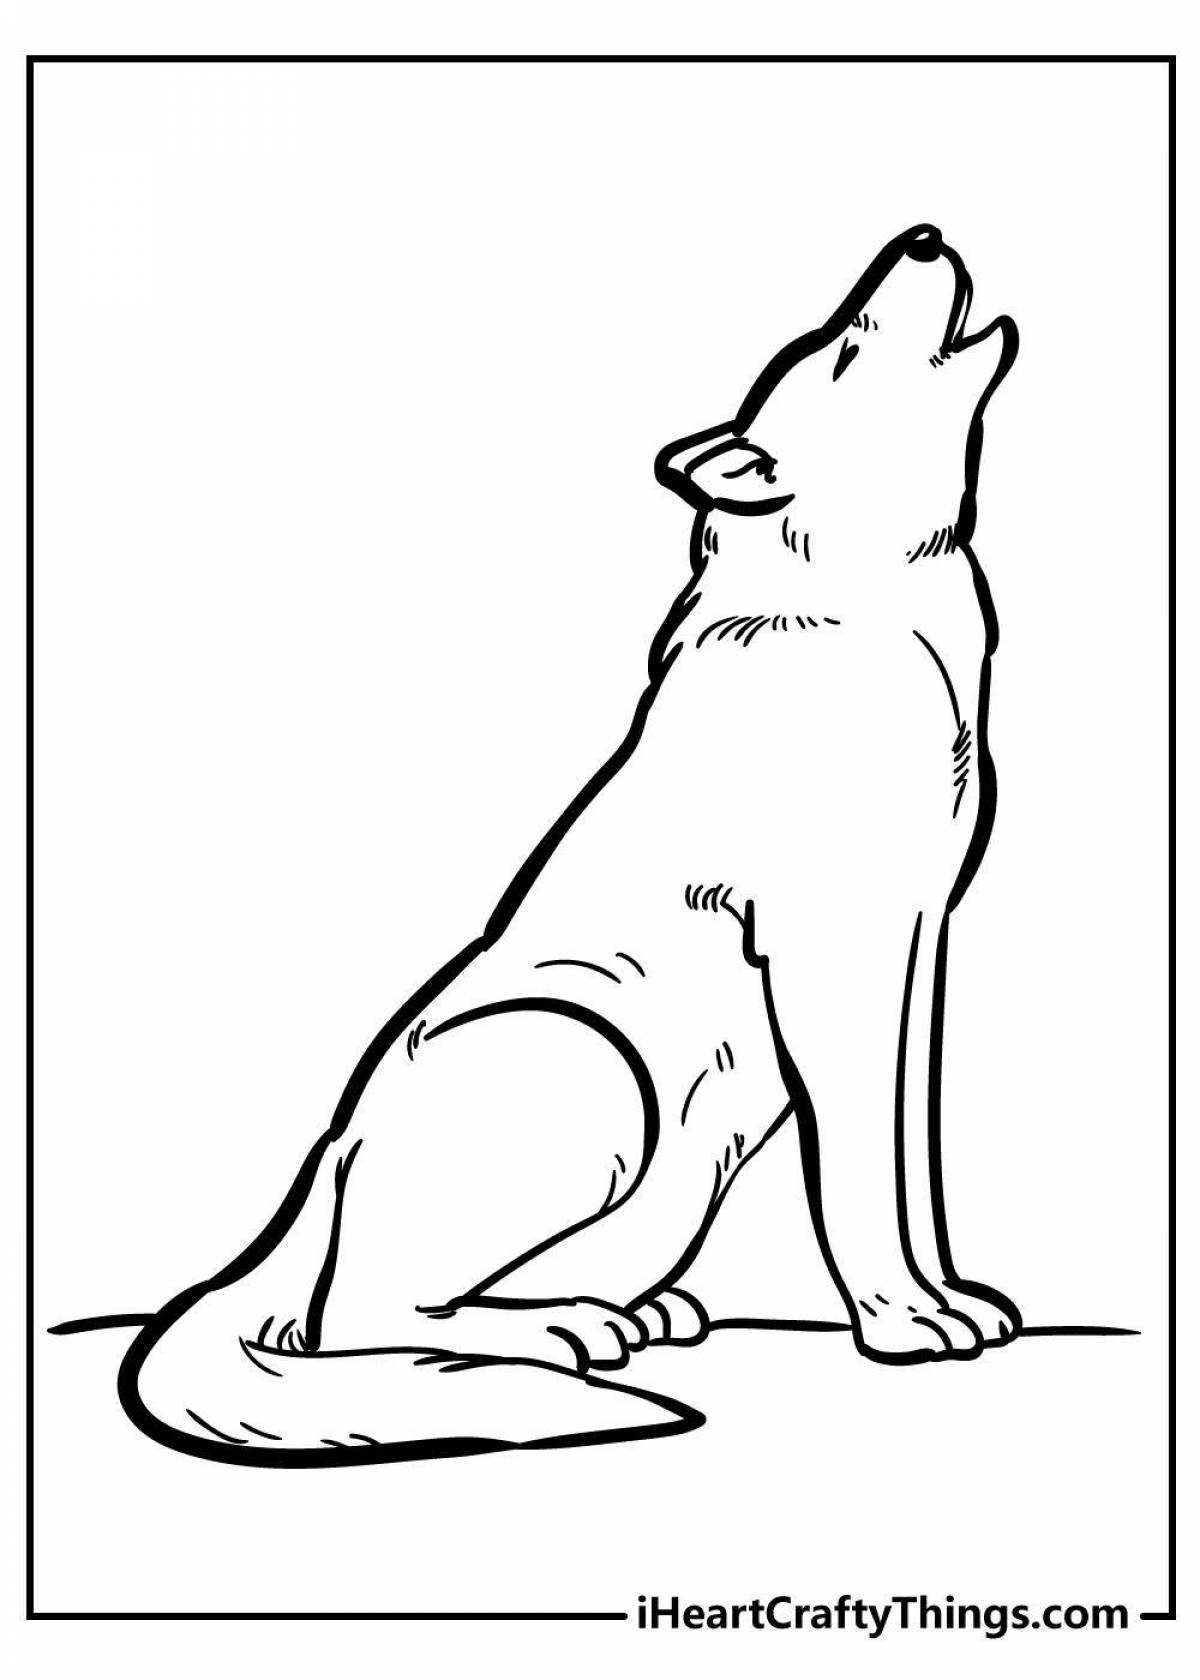 Coloring page beckoning wolf howling at the moon